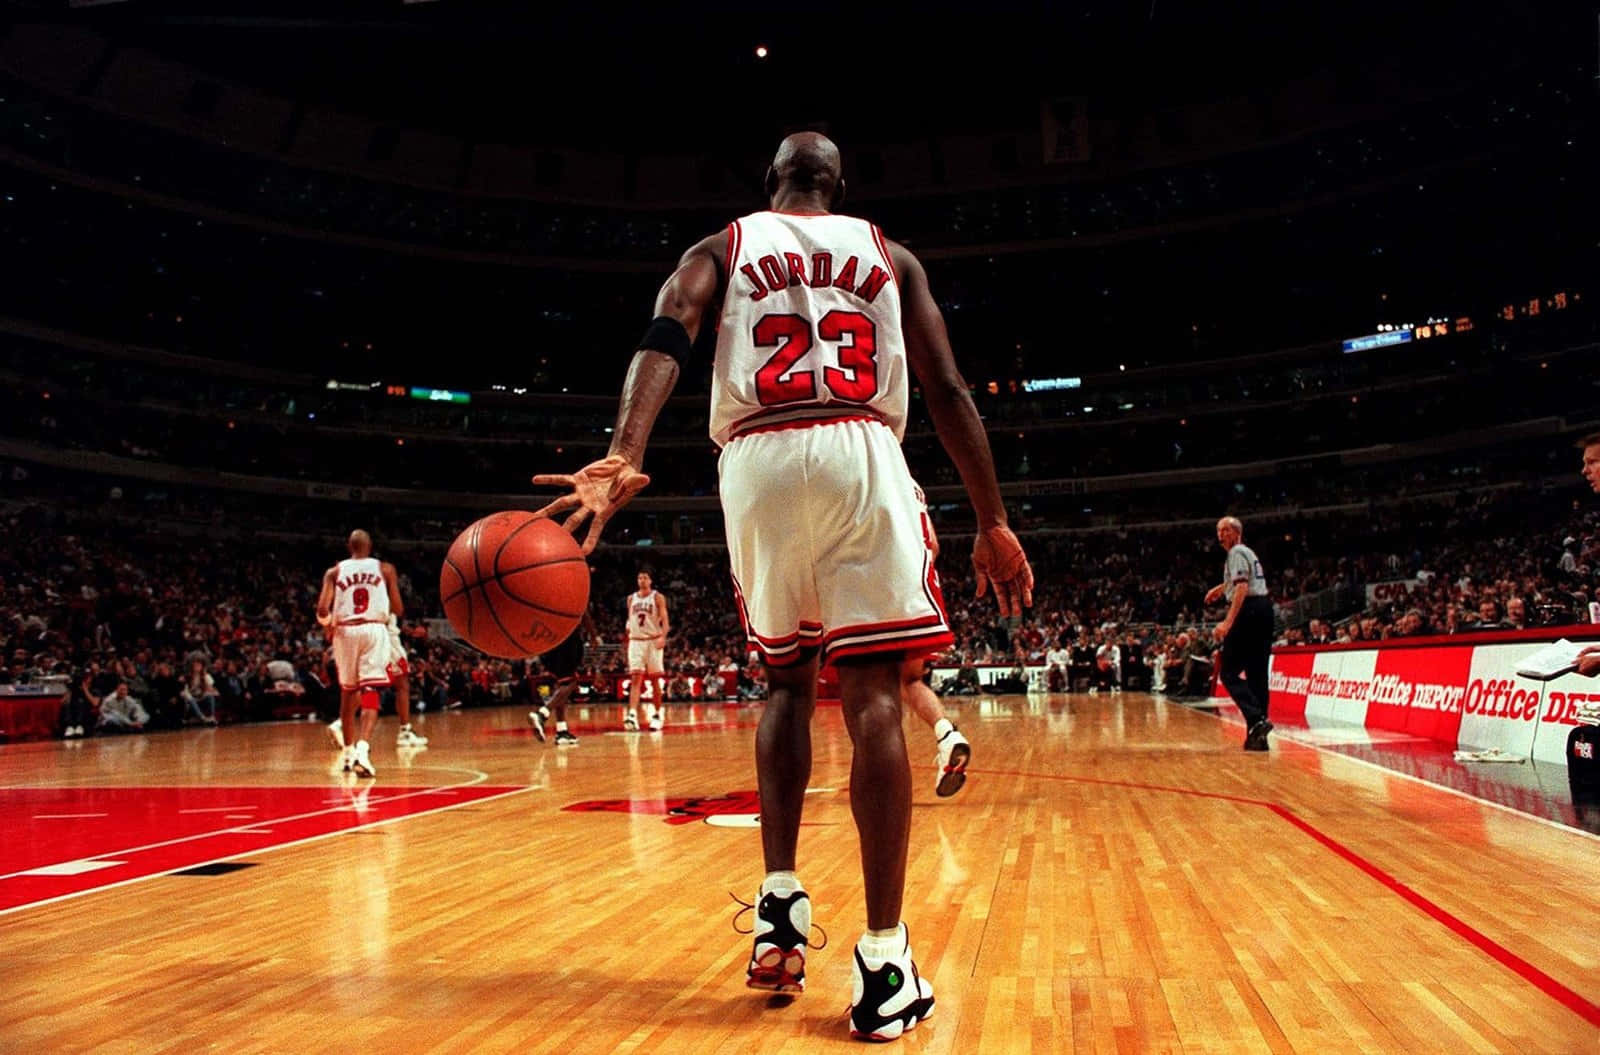 Michaeljordan Is Considered One Of The Greatest Basketball Players Of All Time And A Legend In The Sport. He Won Six Nba Championships With The Chicago Bulls And Has Numerous Records And Accolades To His Name. His Incredible Athletic Abilities And Competitive Drive Made Him A Fan Favorite And A Global Icon. In Addition To His On-court Success, Jordan Is Also A Successful Entrepreneur And Owner Of The Charlotte Hornets. He Continues To Inspire Future Generations Of Basketball Players With His Hard Work And Determination.